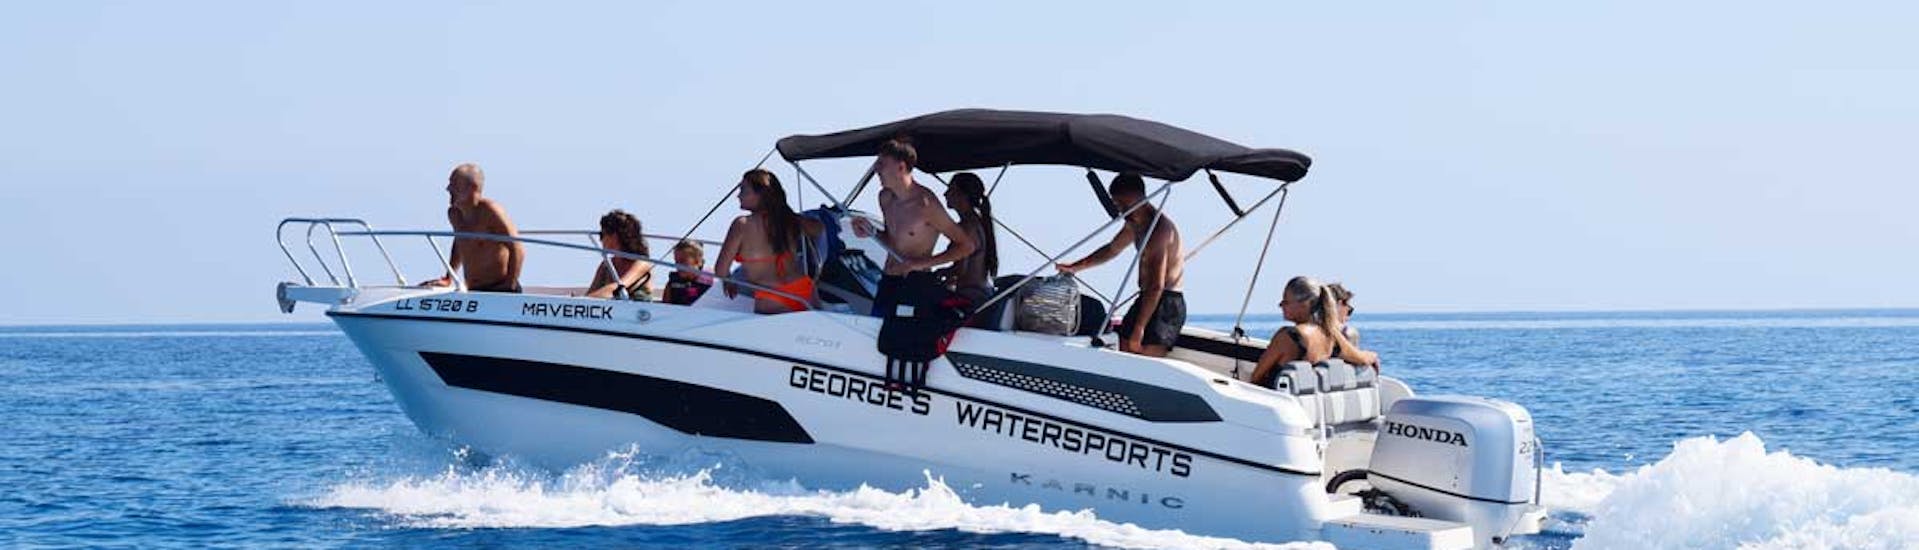 Poeople on Boat from Boat Rental in Latchi (up to 9 people) by George's Boat Hire.